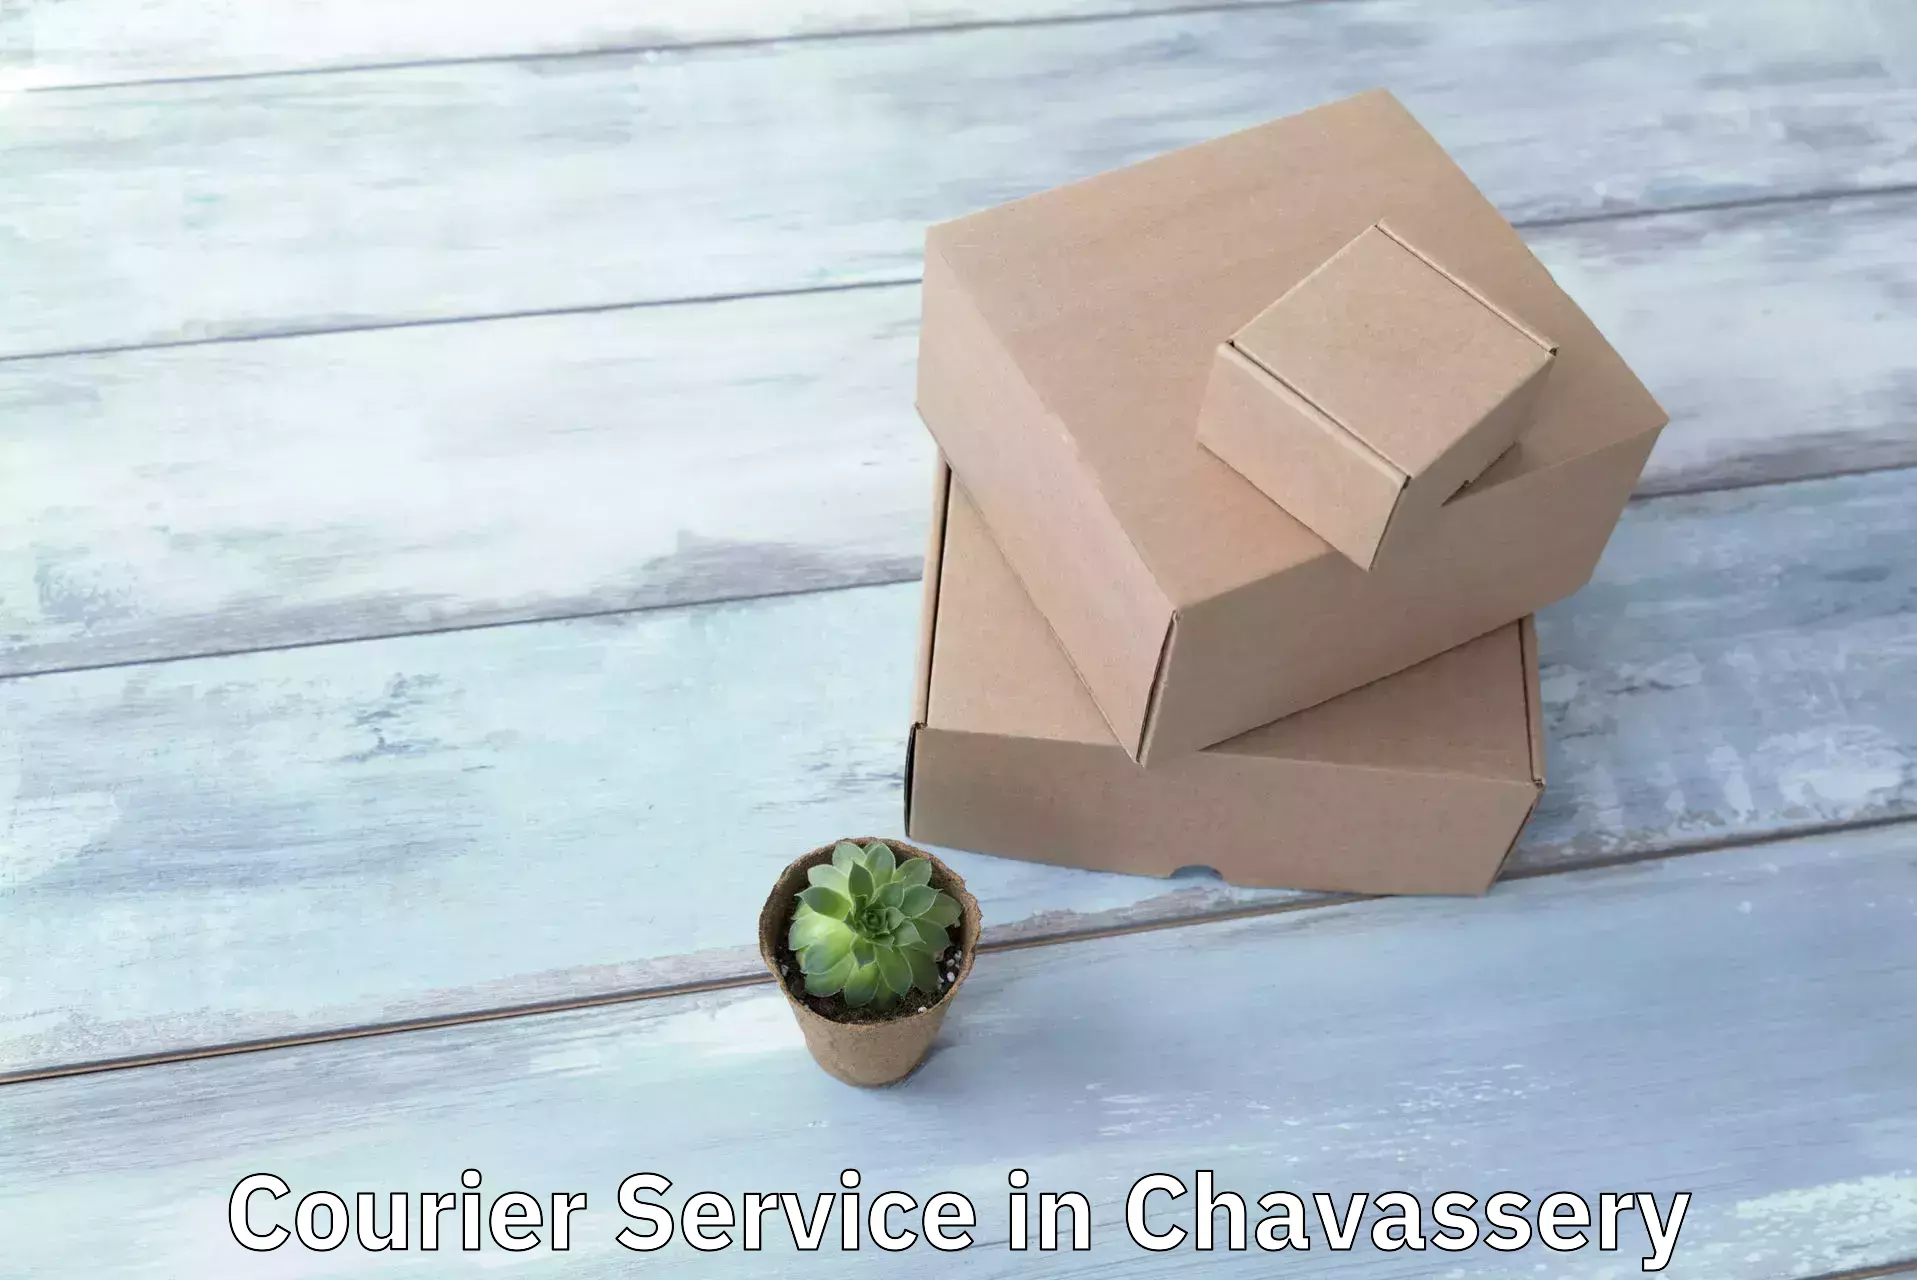 Doorstep delivery service in Chavassery